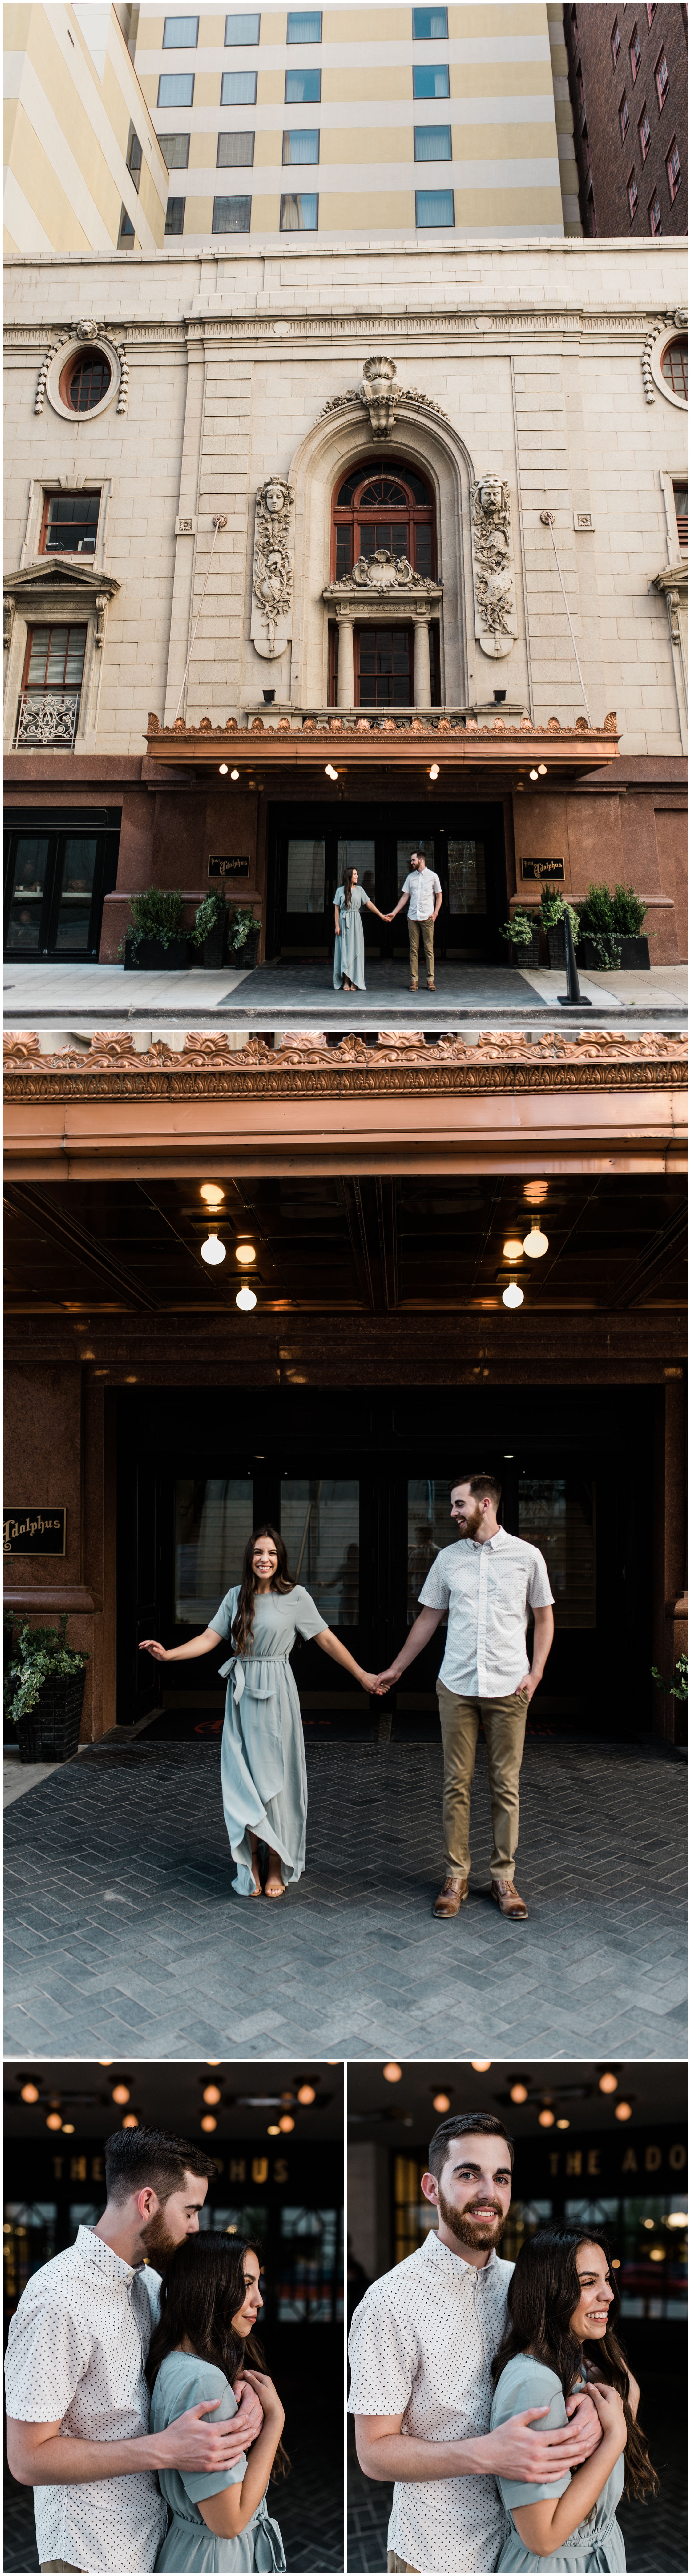  Dallas Engagement Session | The Lumen Room Engagement session | Fort Worth Wedding photographer | www.jordanmitchellphotography.com 